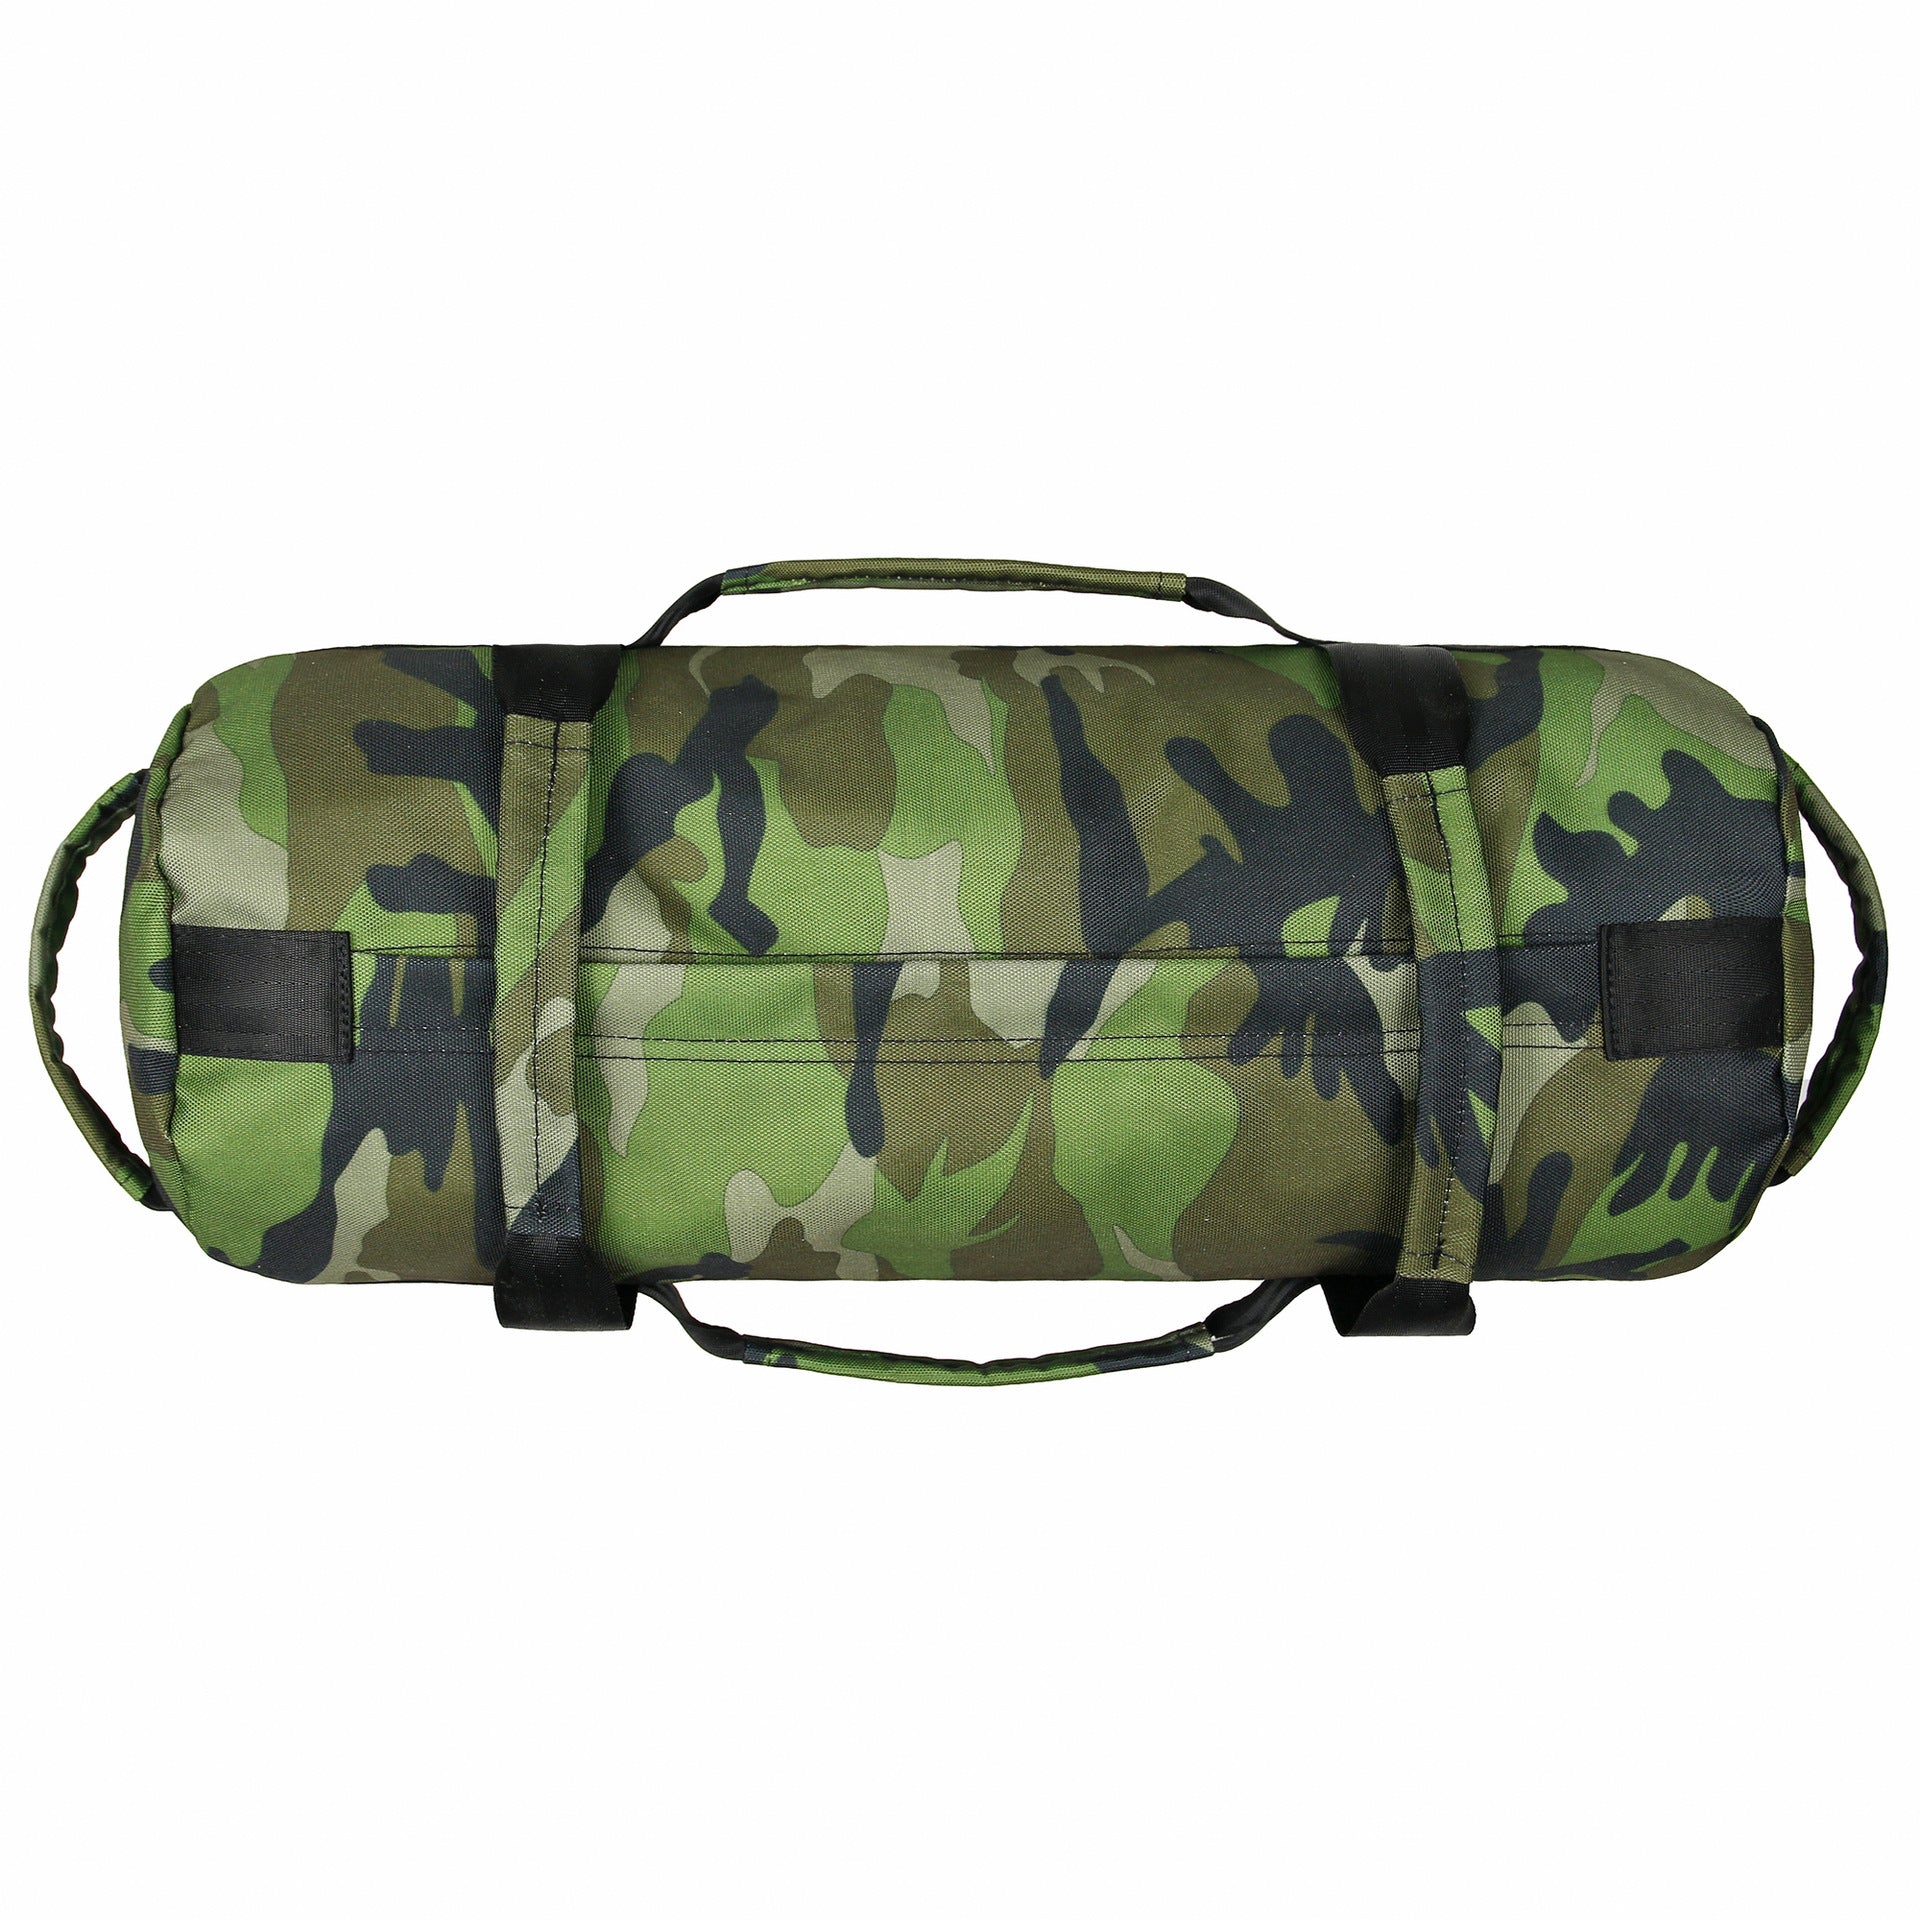 WILKYs0Camouflage Sports Fitness Weightlifting Bag
 Product Information：


 Specification: 46*19*19cm
 
 Color: CP camouflage, green camouflage, navy camouflage
 
 Material: 900D Oxford cloth
 
 Folding size: 25*25*